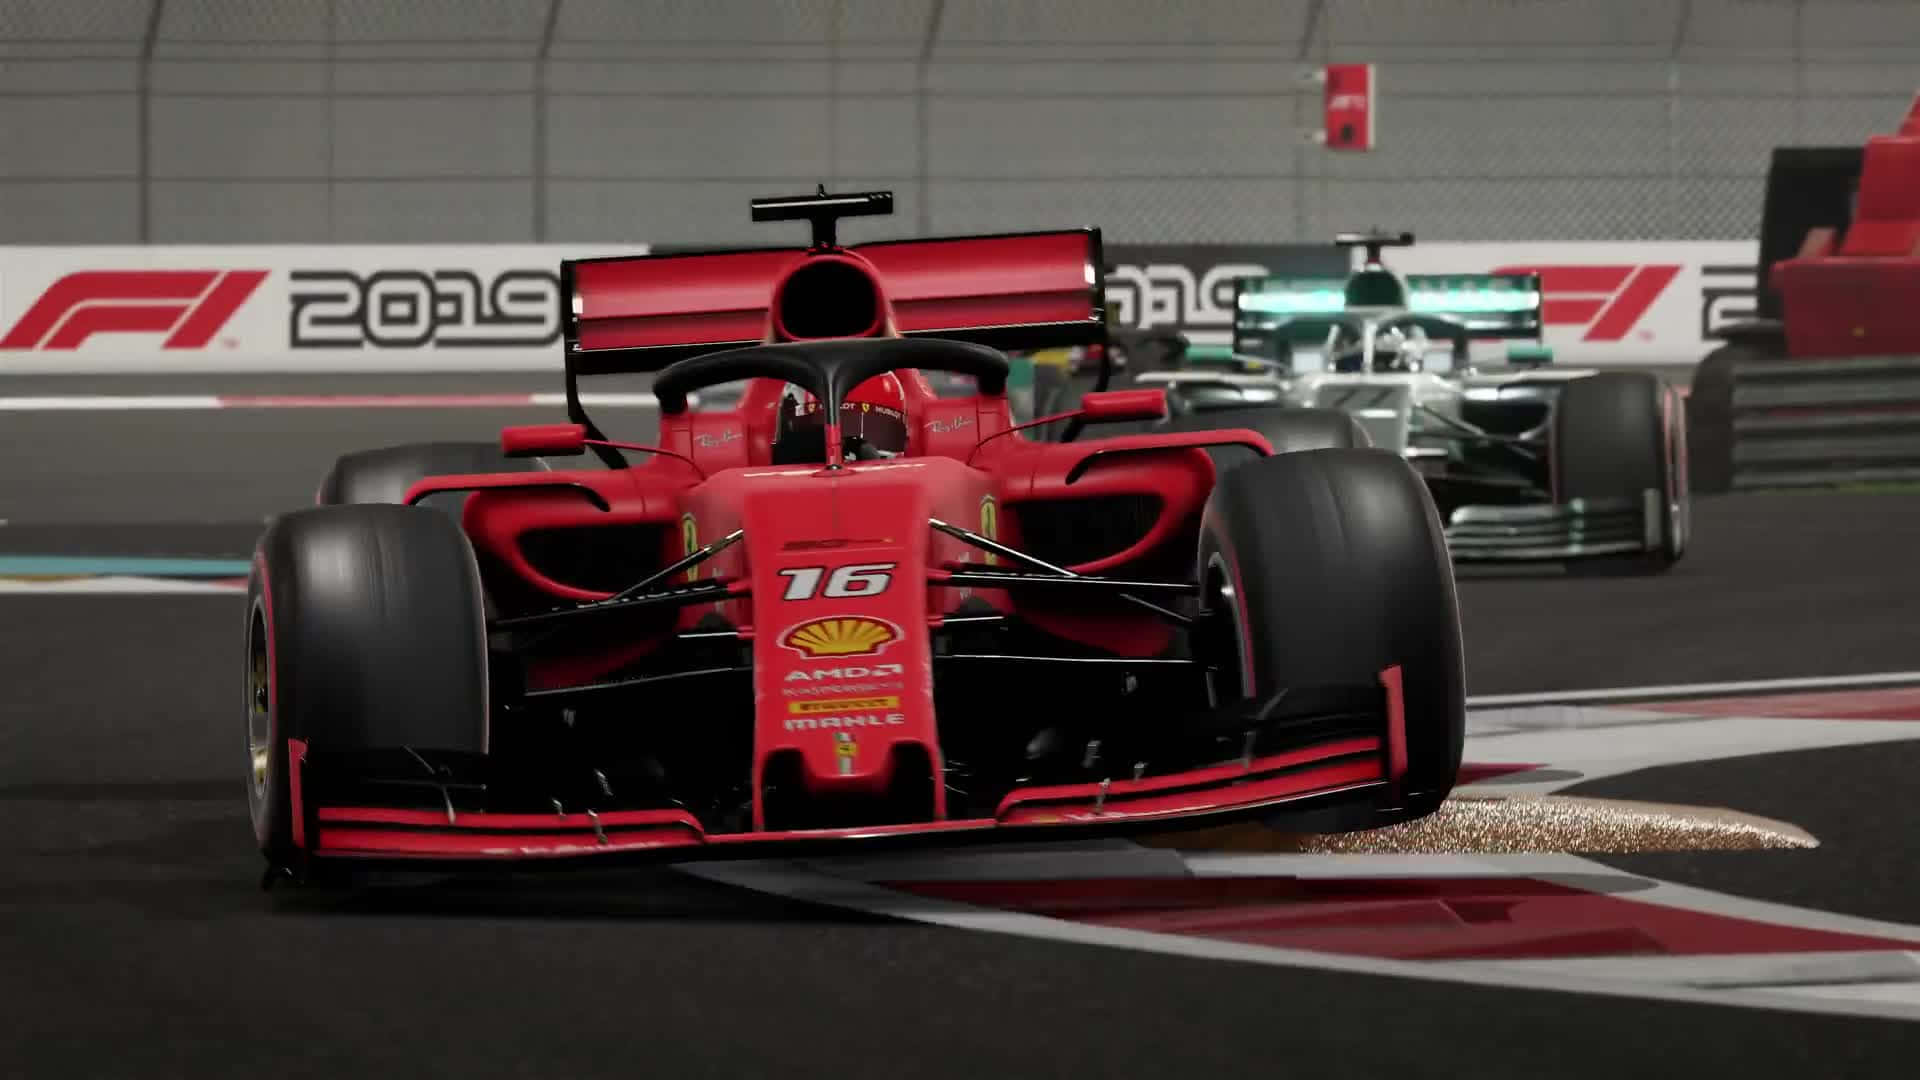 Race to Victory with F1 2019